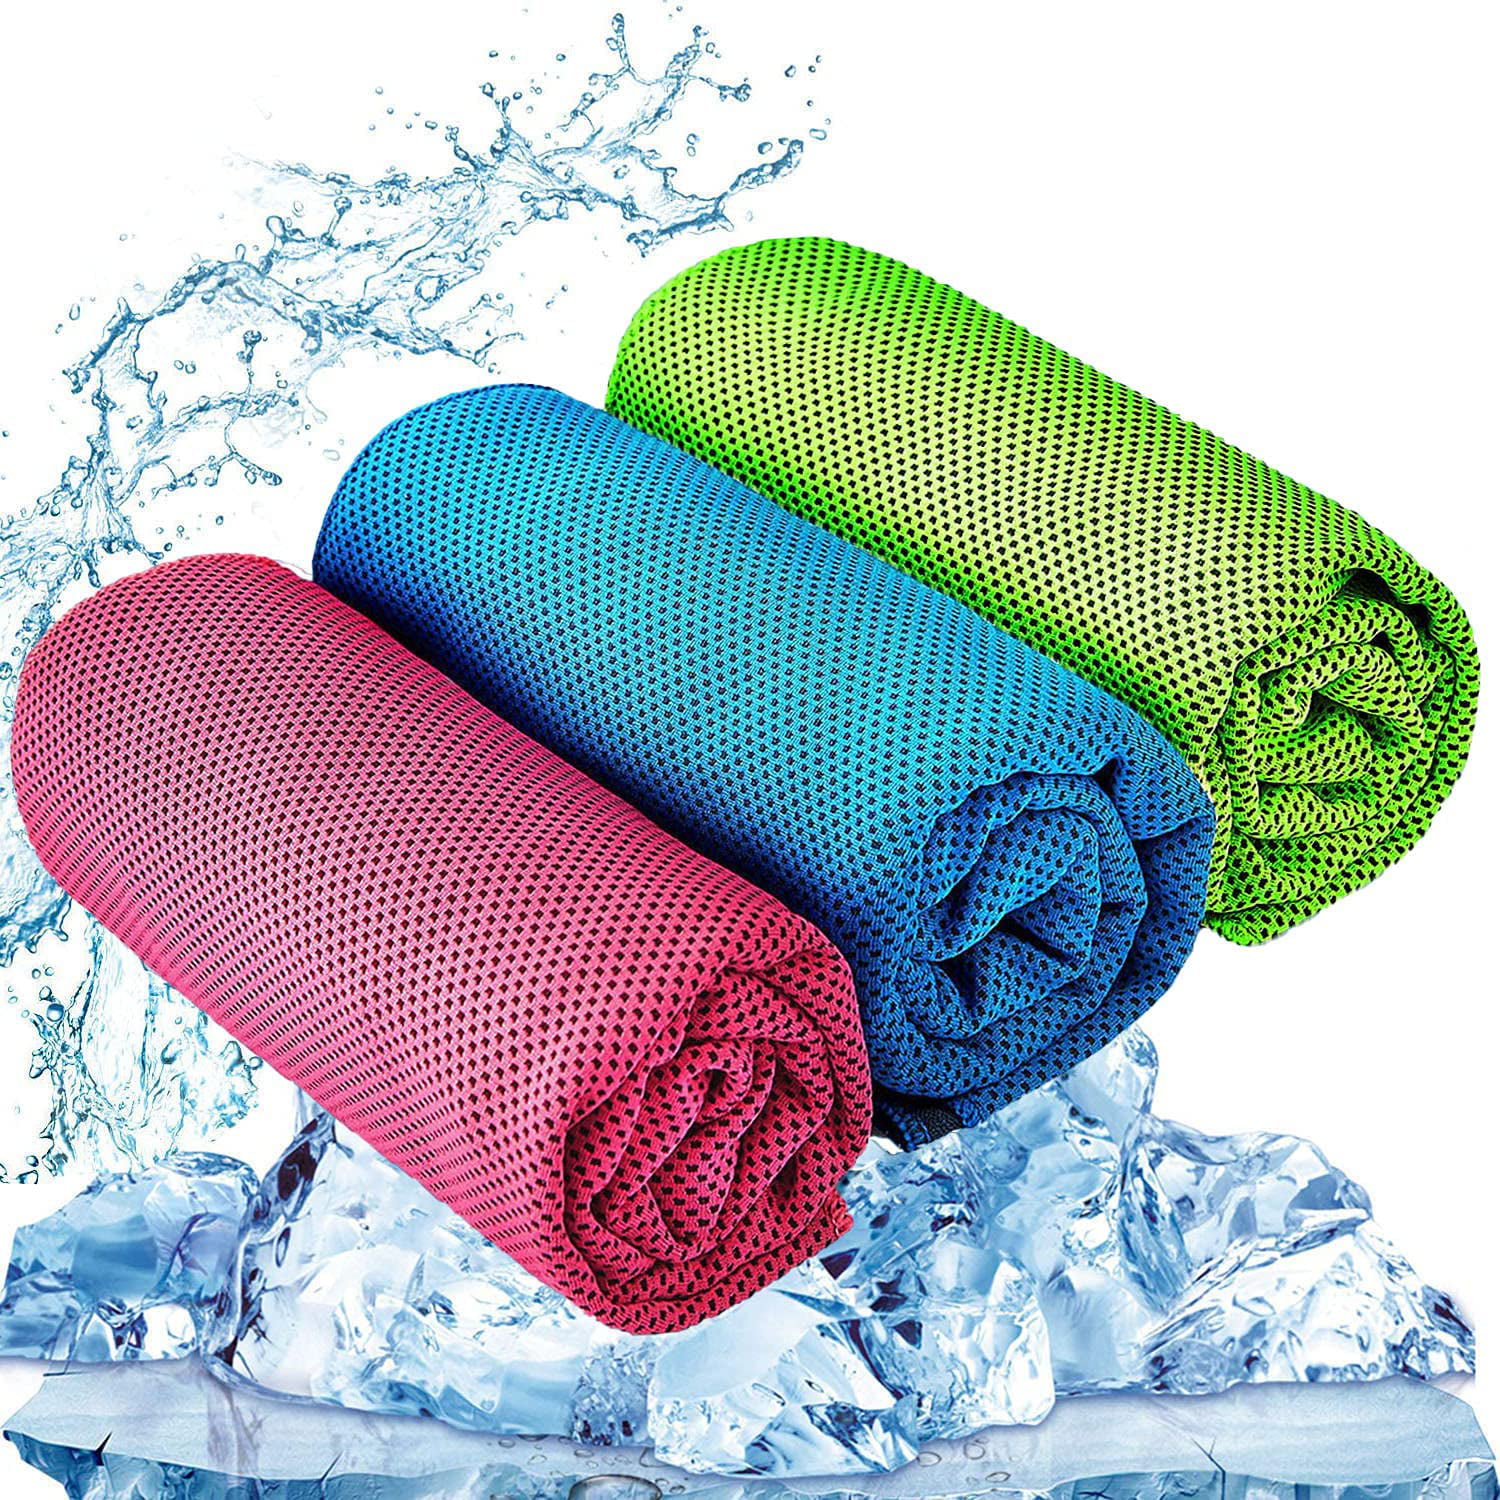 Cooling Towel, Happiwiz 3 Pcs (40x12) Cool Cold Towel for Neck,  Microfiber Ice Towel, Soft Breathable Chilly Towel for Sports, Yoga, Golf,  Gym